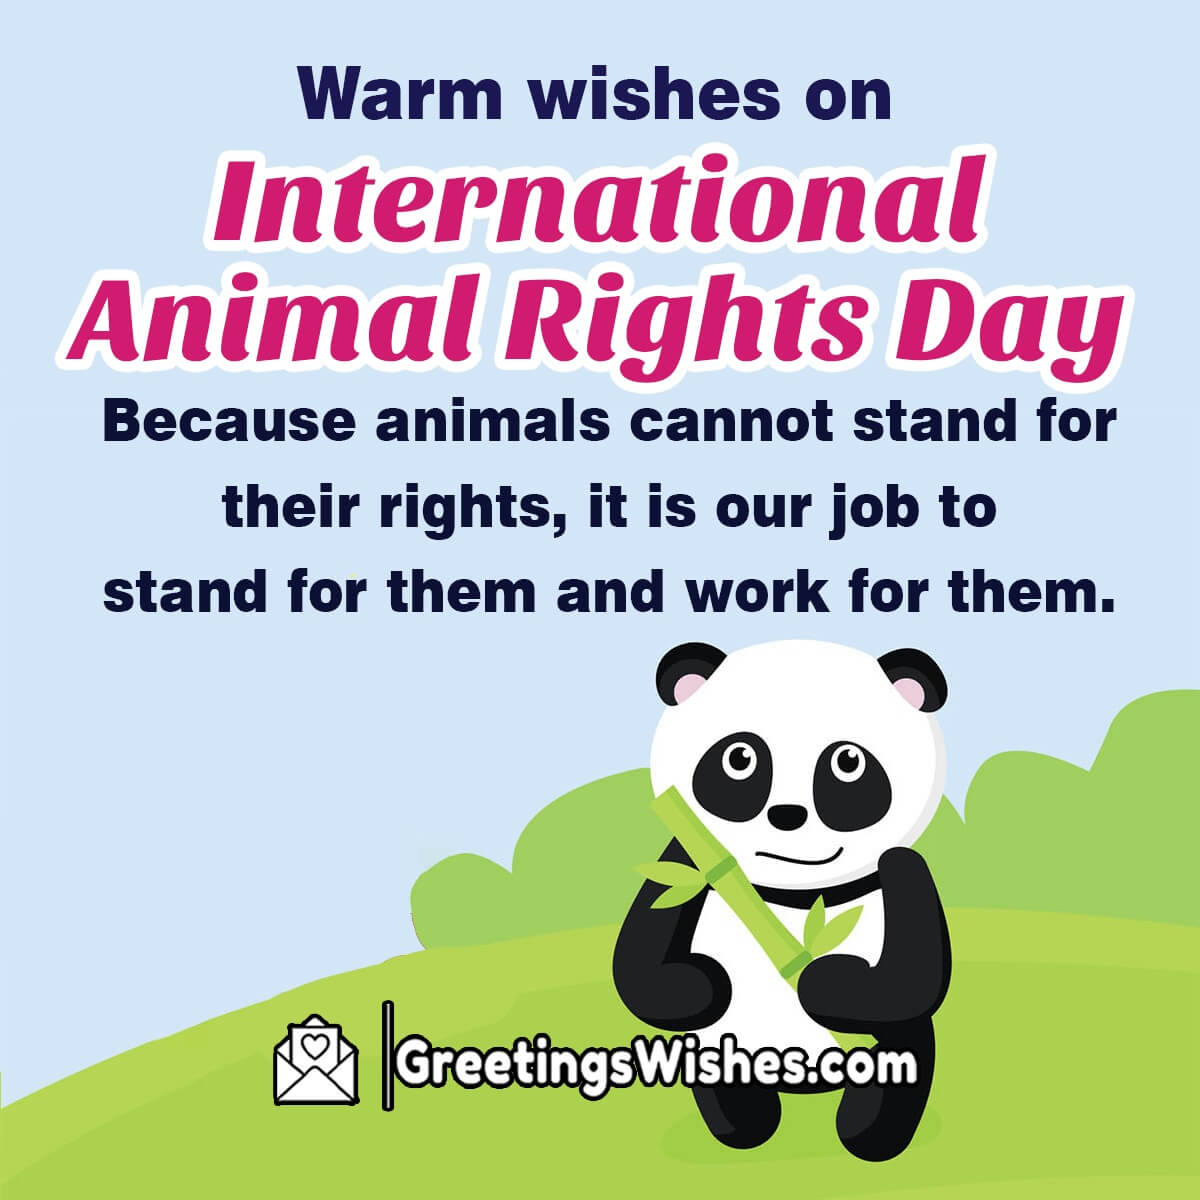 Warm wishes on International Animal Rights Day